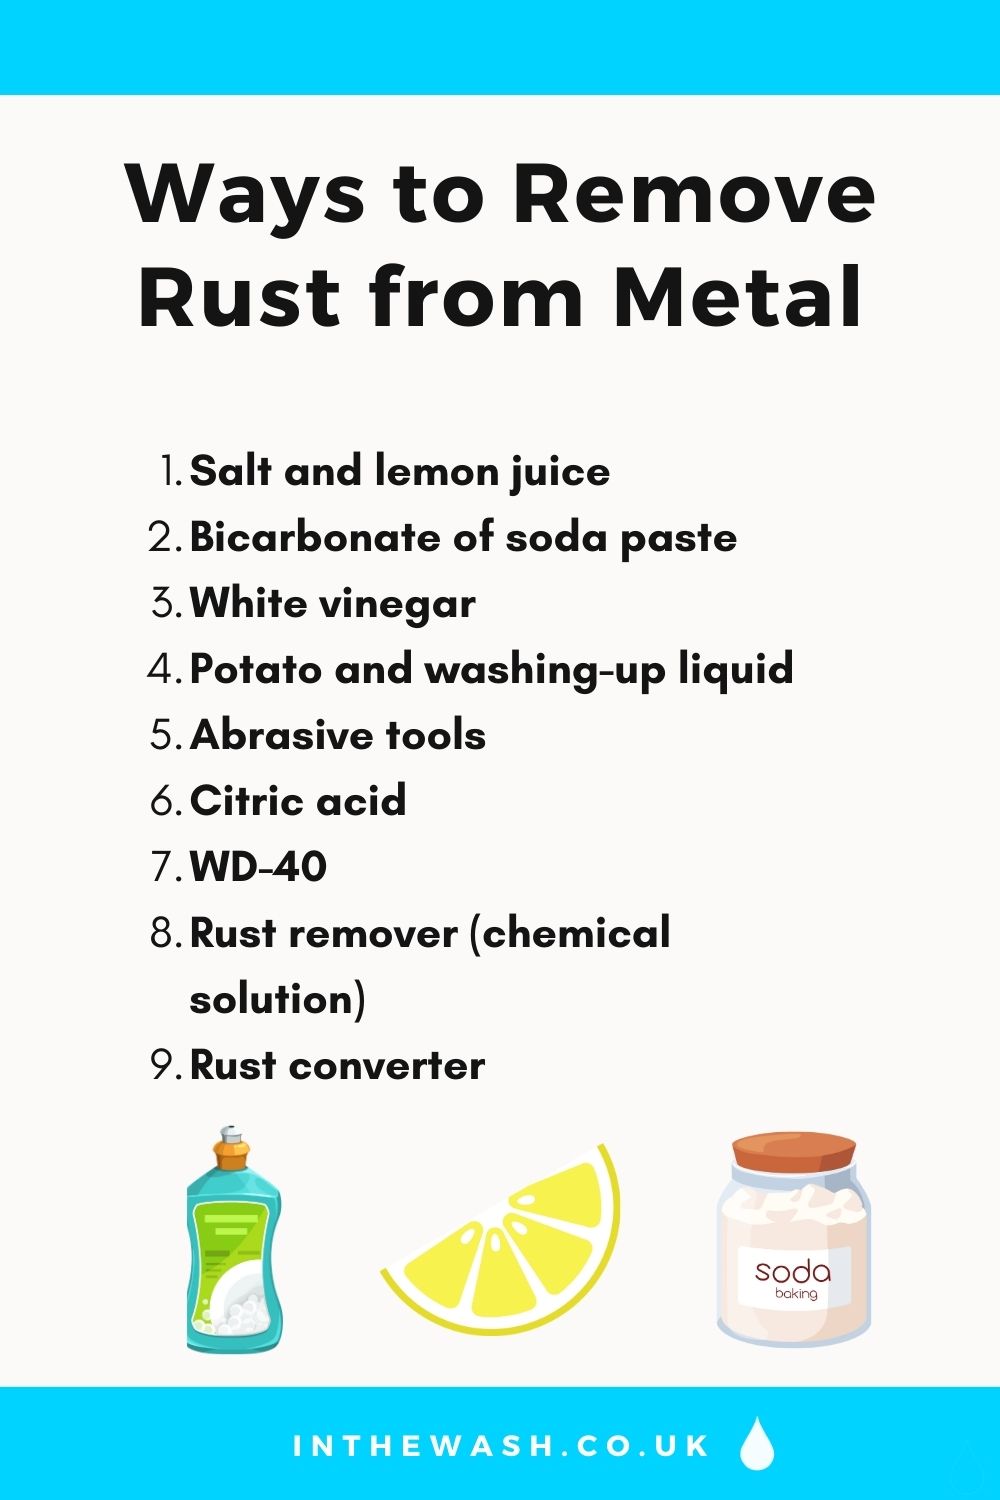 Ways to remove rust from metal